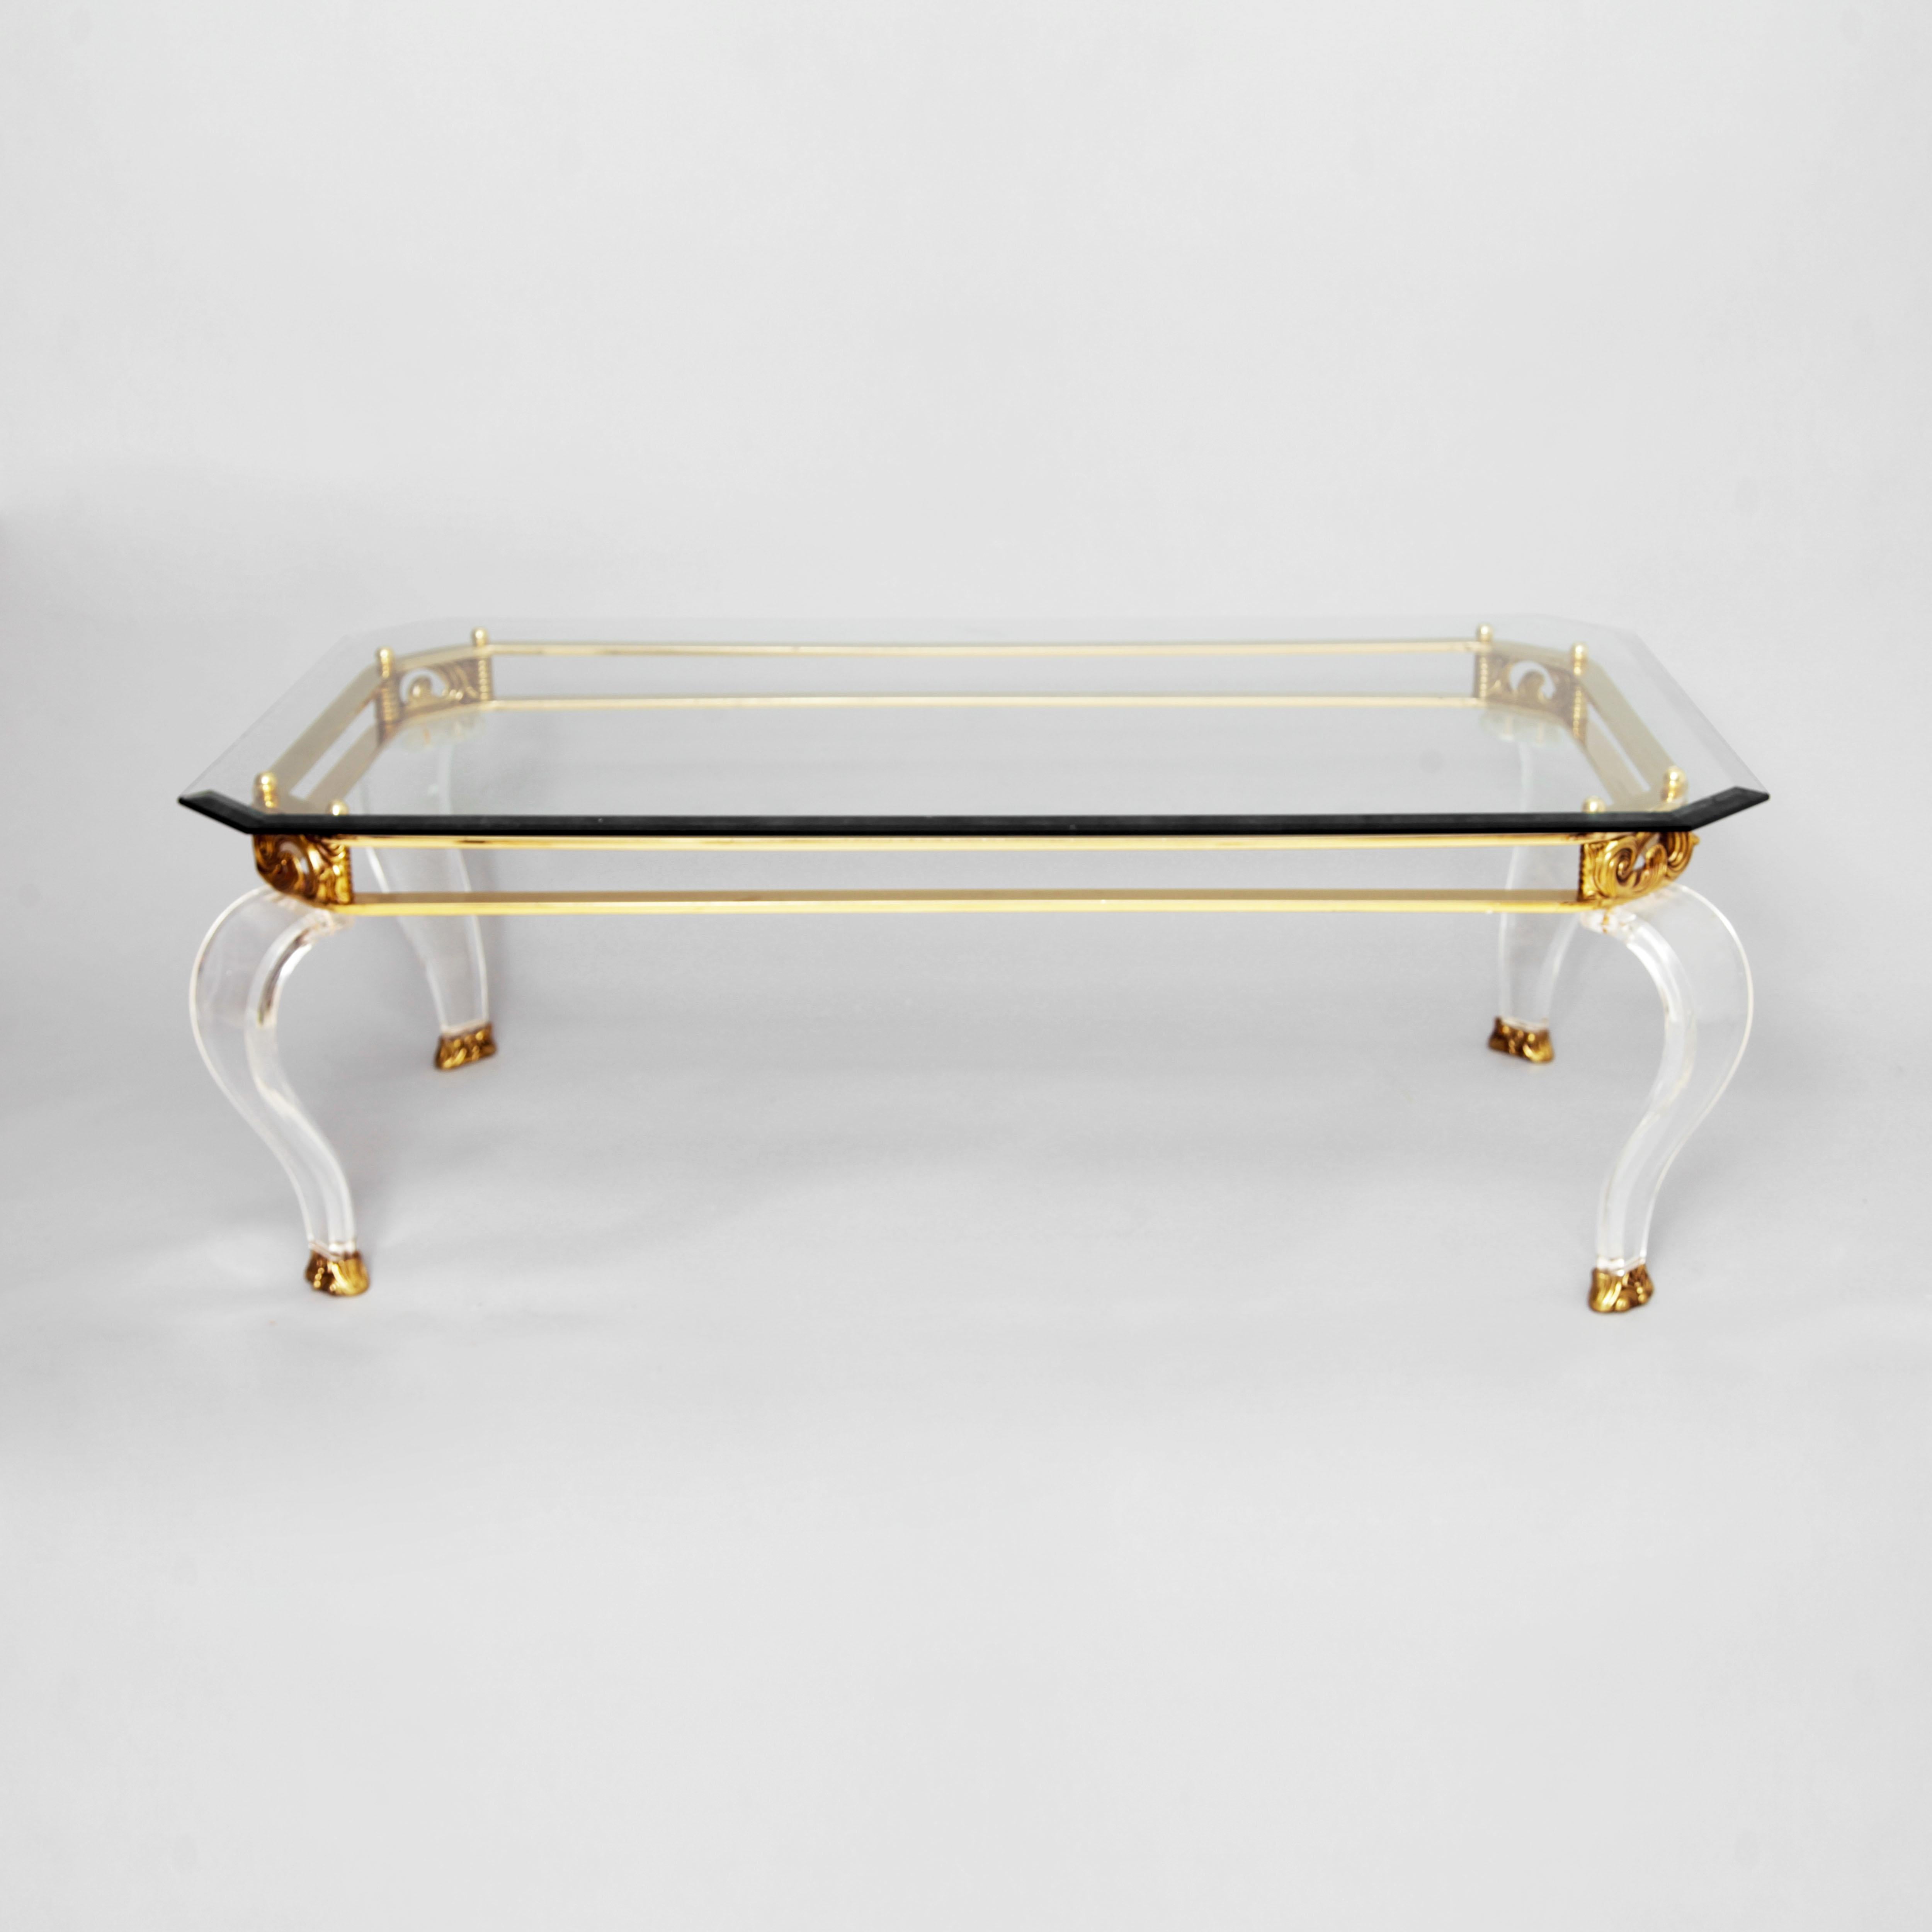 Intricate brass and curved Lucite legs rectangular coffee table. Clear octagonal glass top.